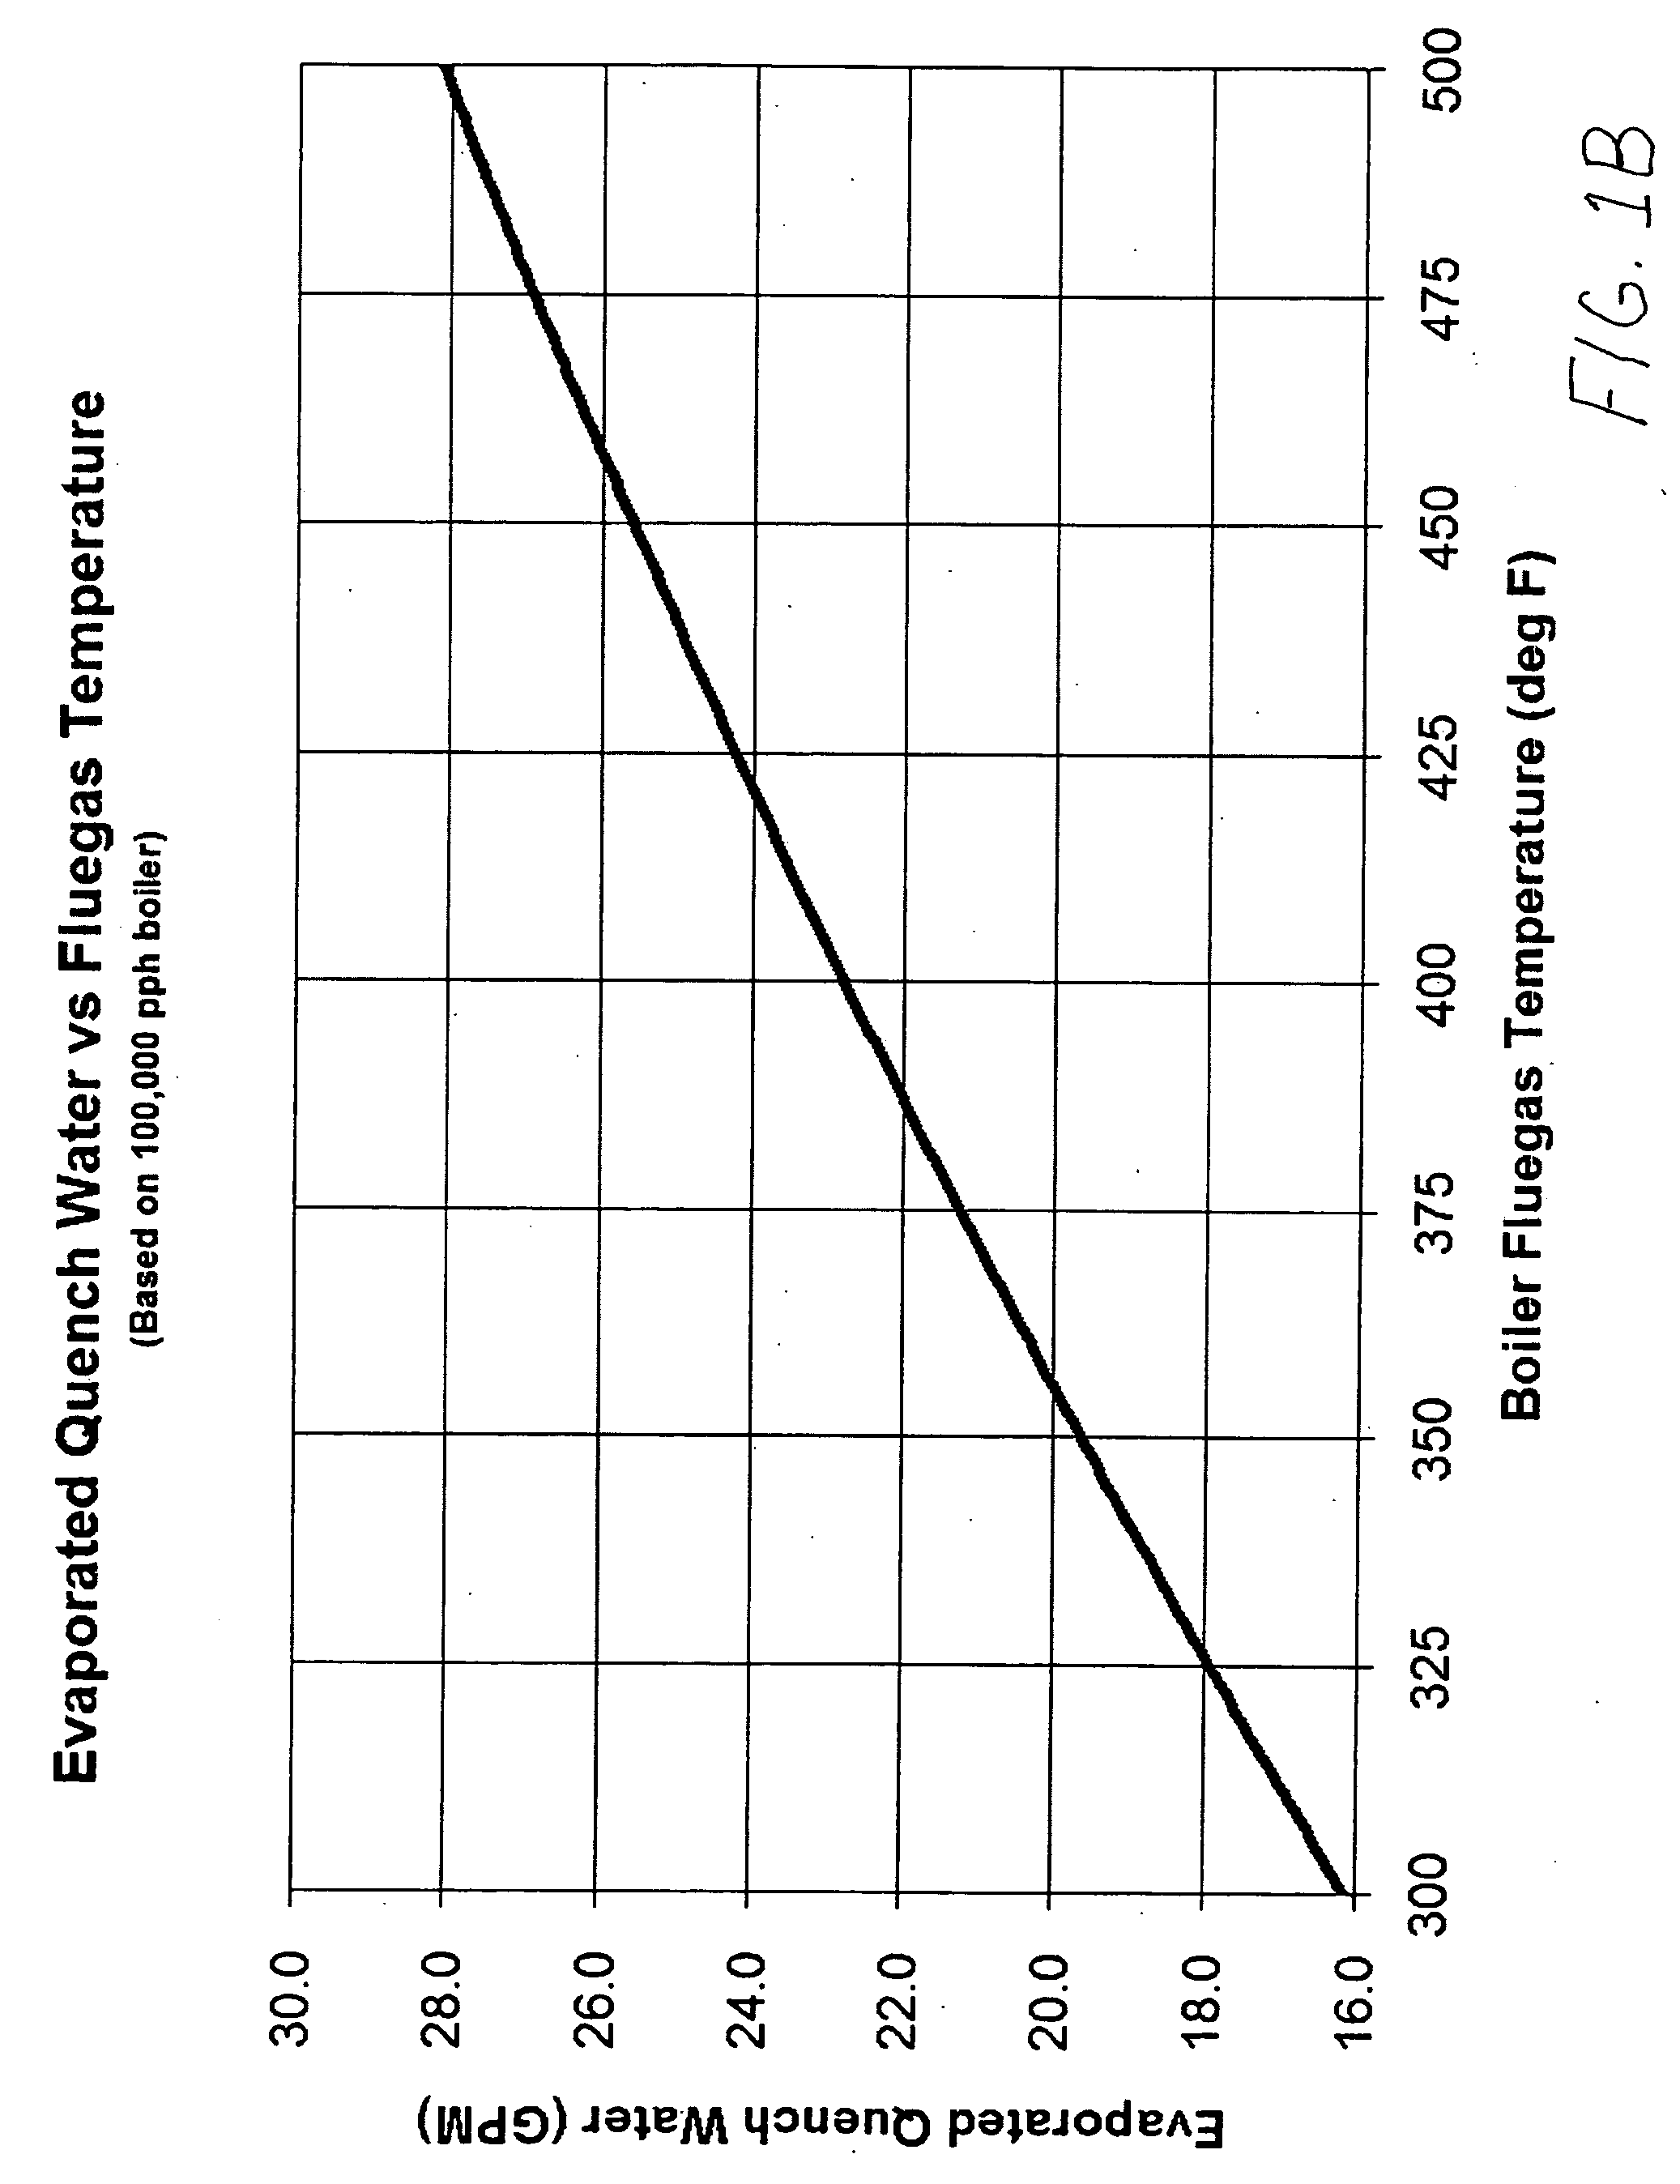 Method and apparatus for eliminating or reducing waste effluent from a wet electrostatic precipitator